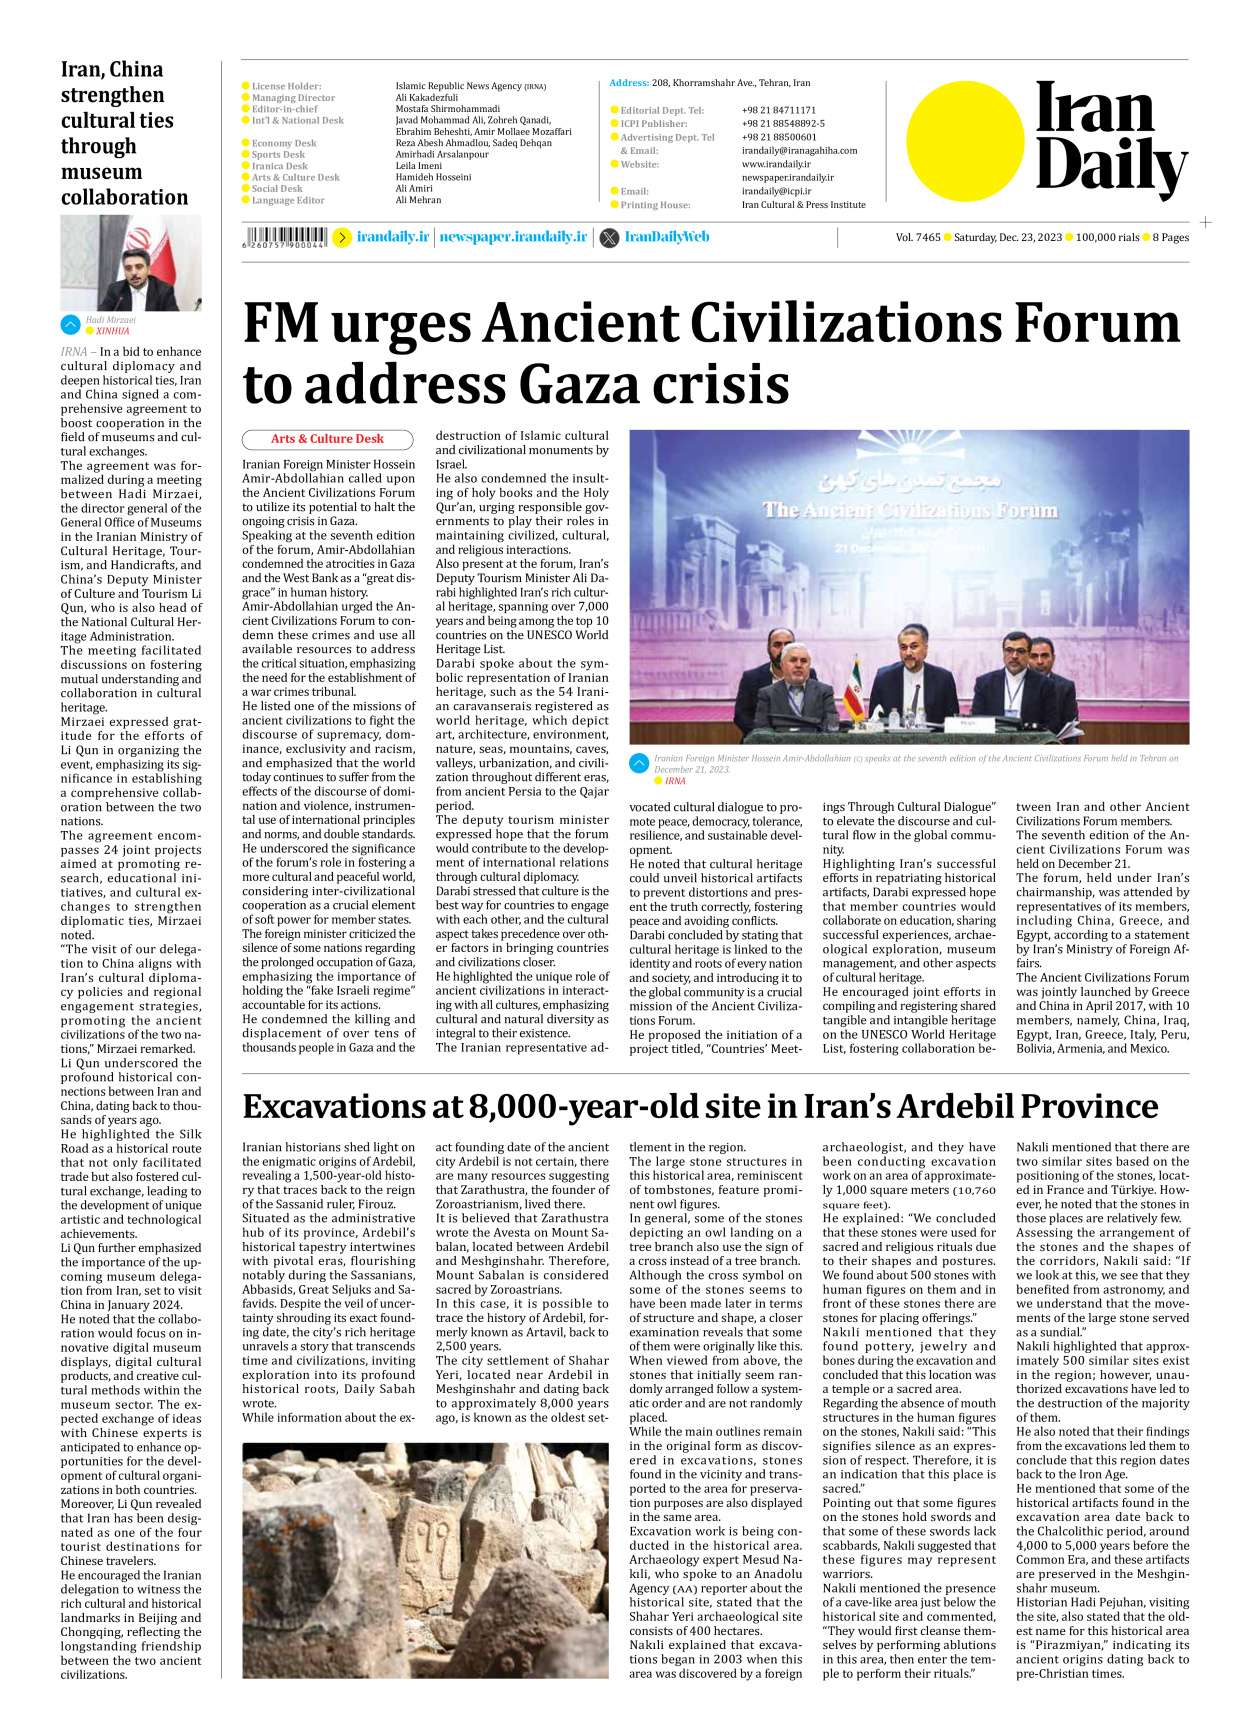 Iran Daily - Number Seven Thousand Four Hundred and Sixty Five - 23 December 2023 - Page 8